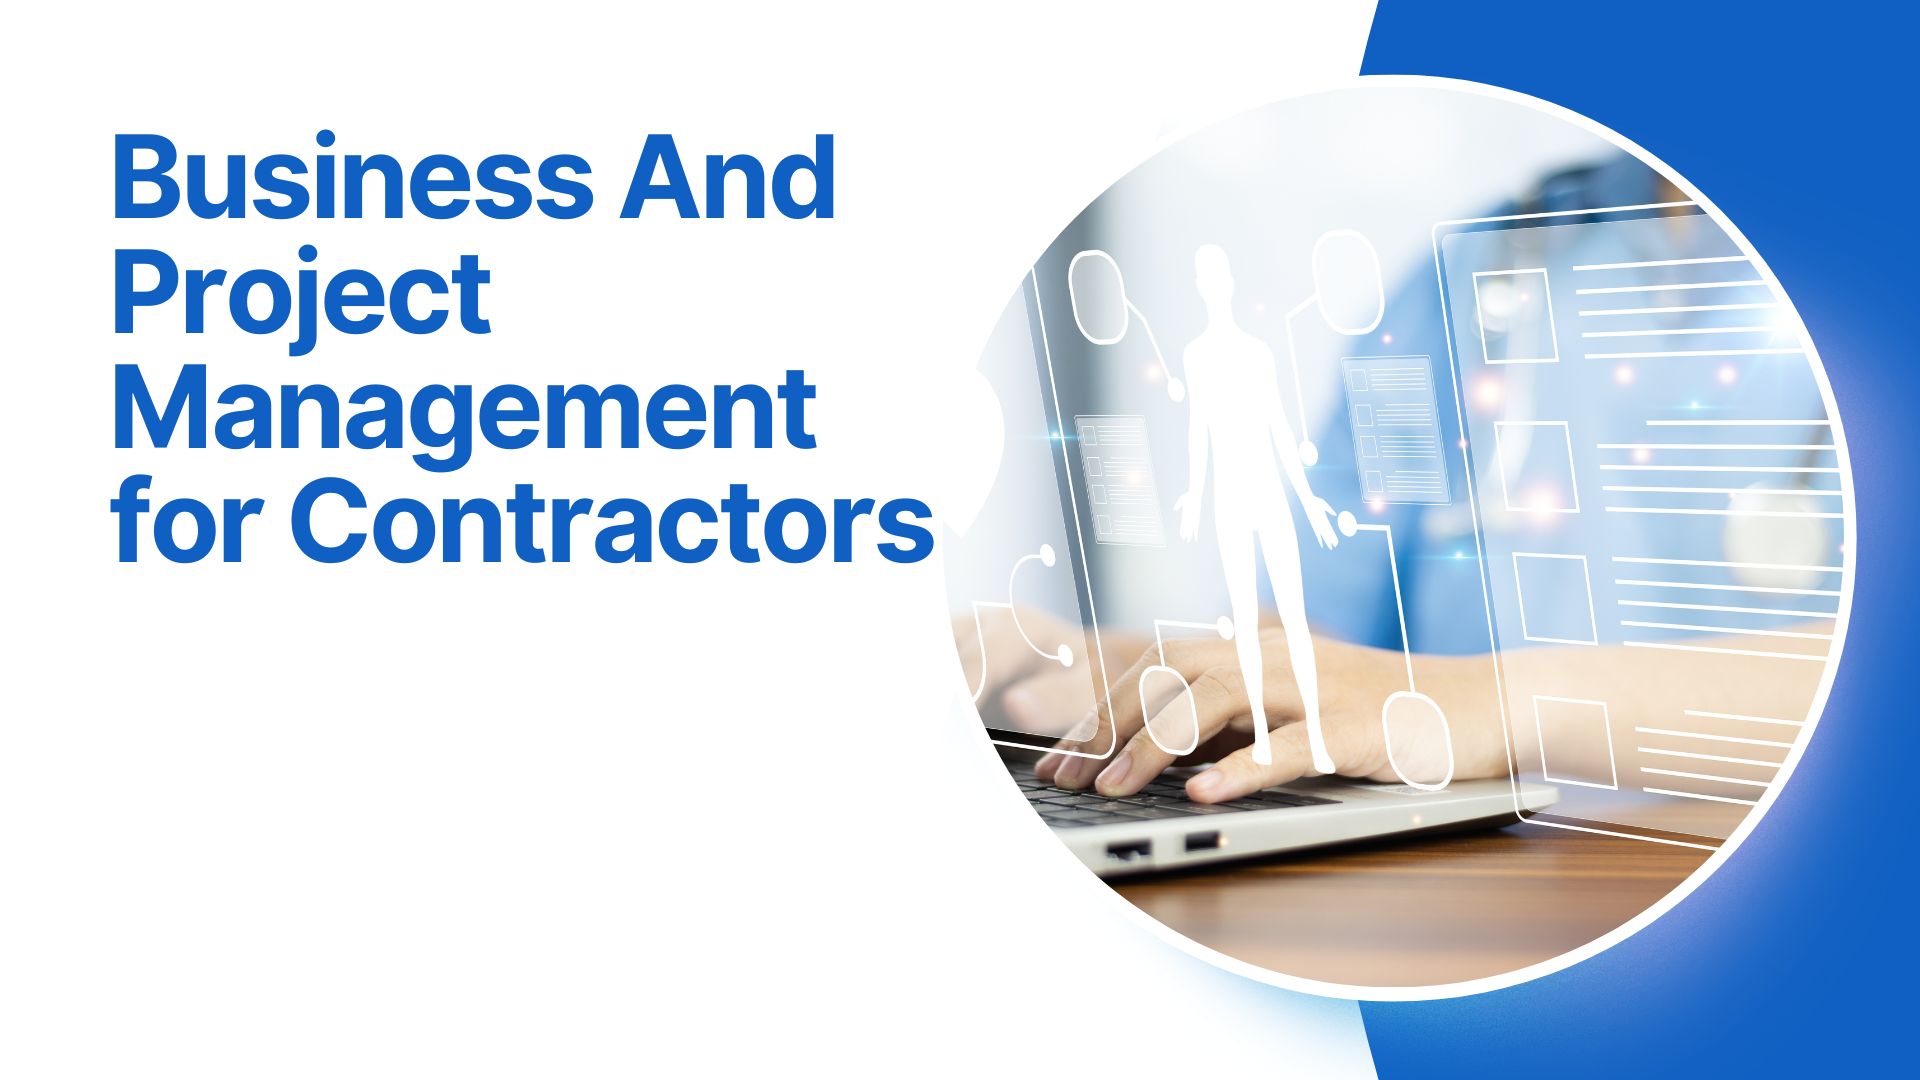 Business And Project Management for Contractors